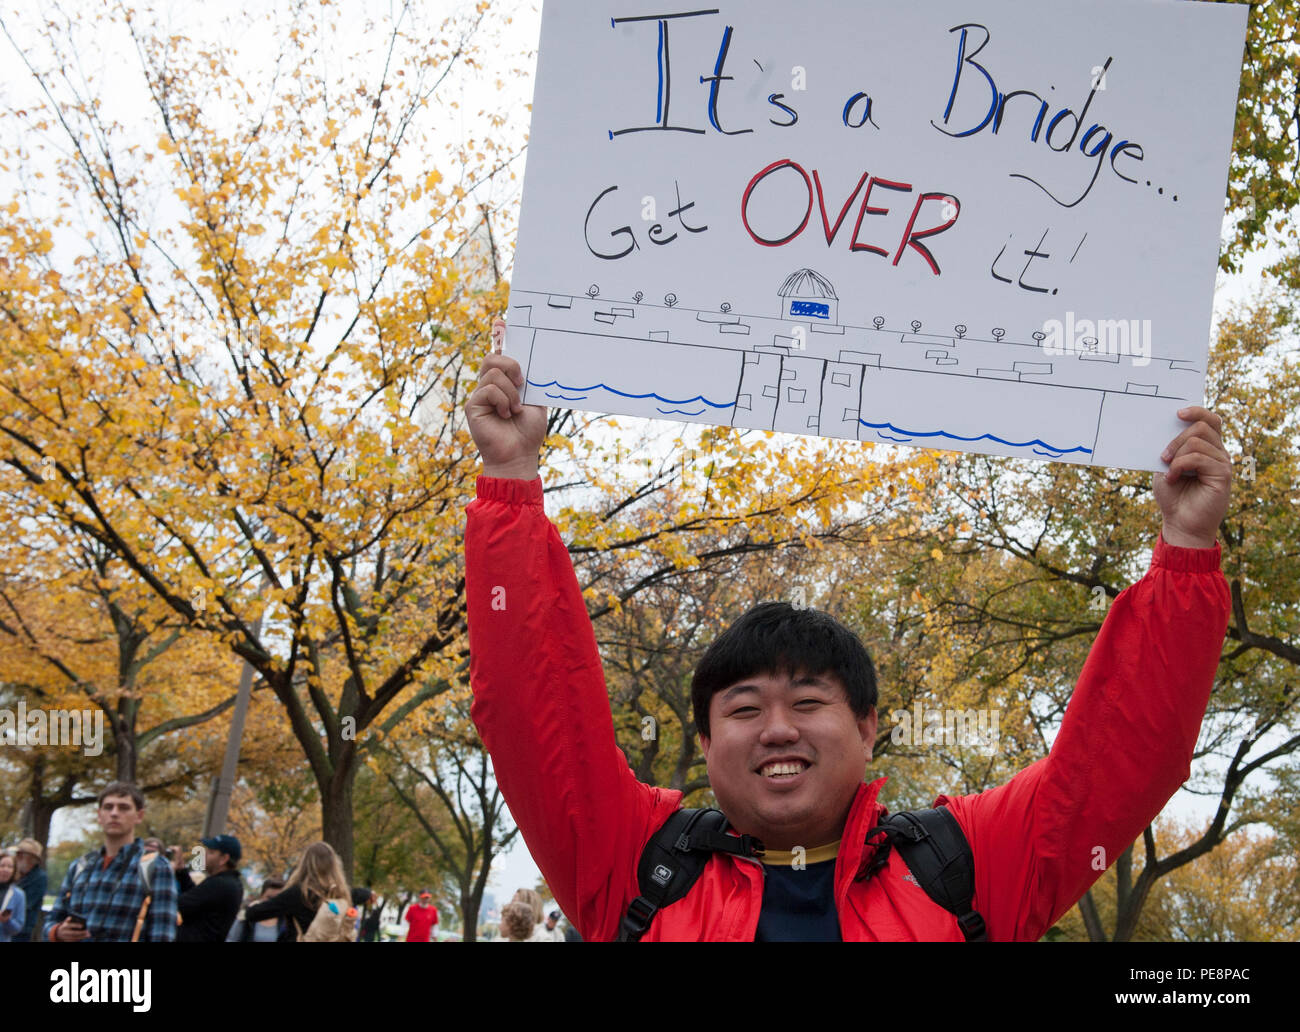 Michael Yee holds a sign to encourage participants in the 40th Annual Marine Corps Marathon (MCM) in Washington, Oct. 25, 2015. The sign references the MCM course segment 'Beat the Bridge' wherein participants must reach the 14th Street Bridge at a fourteen-minute per mile pace. (U.S. Marine Corps photo by Cpl. Diana Sims/Released) Stock Photo